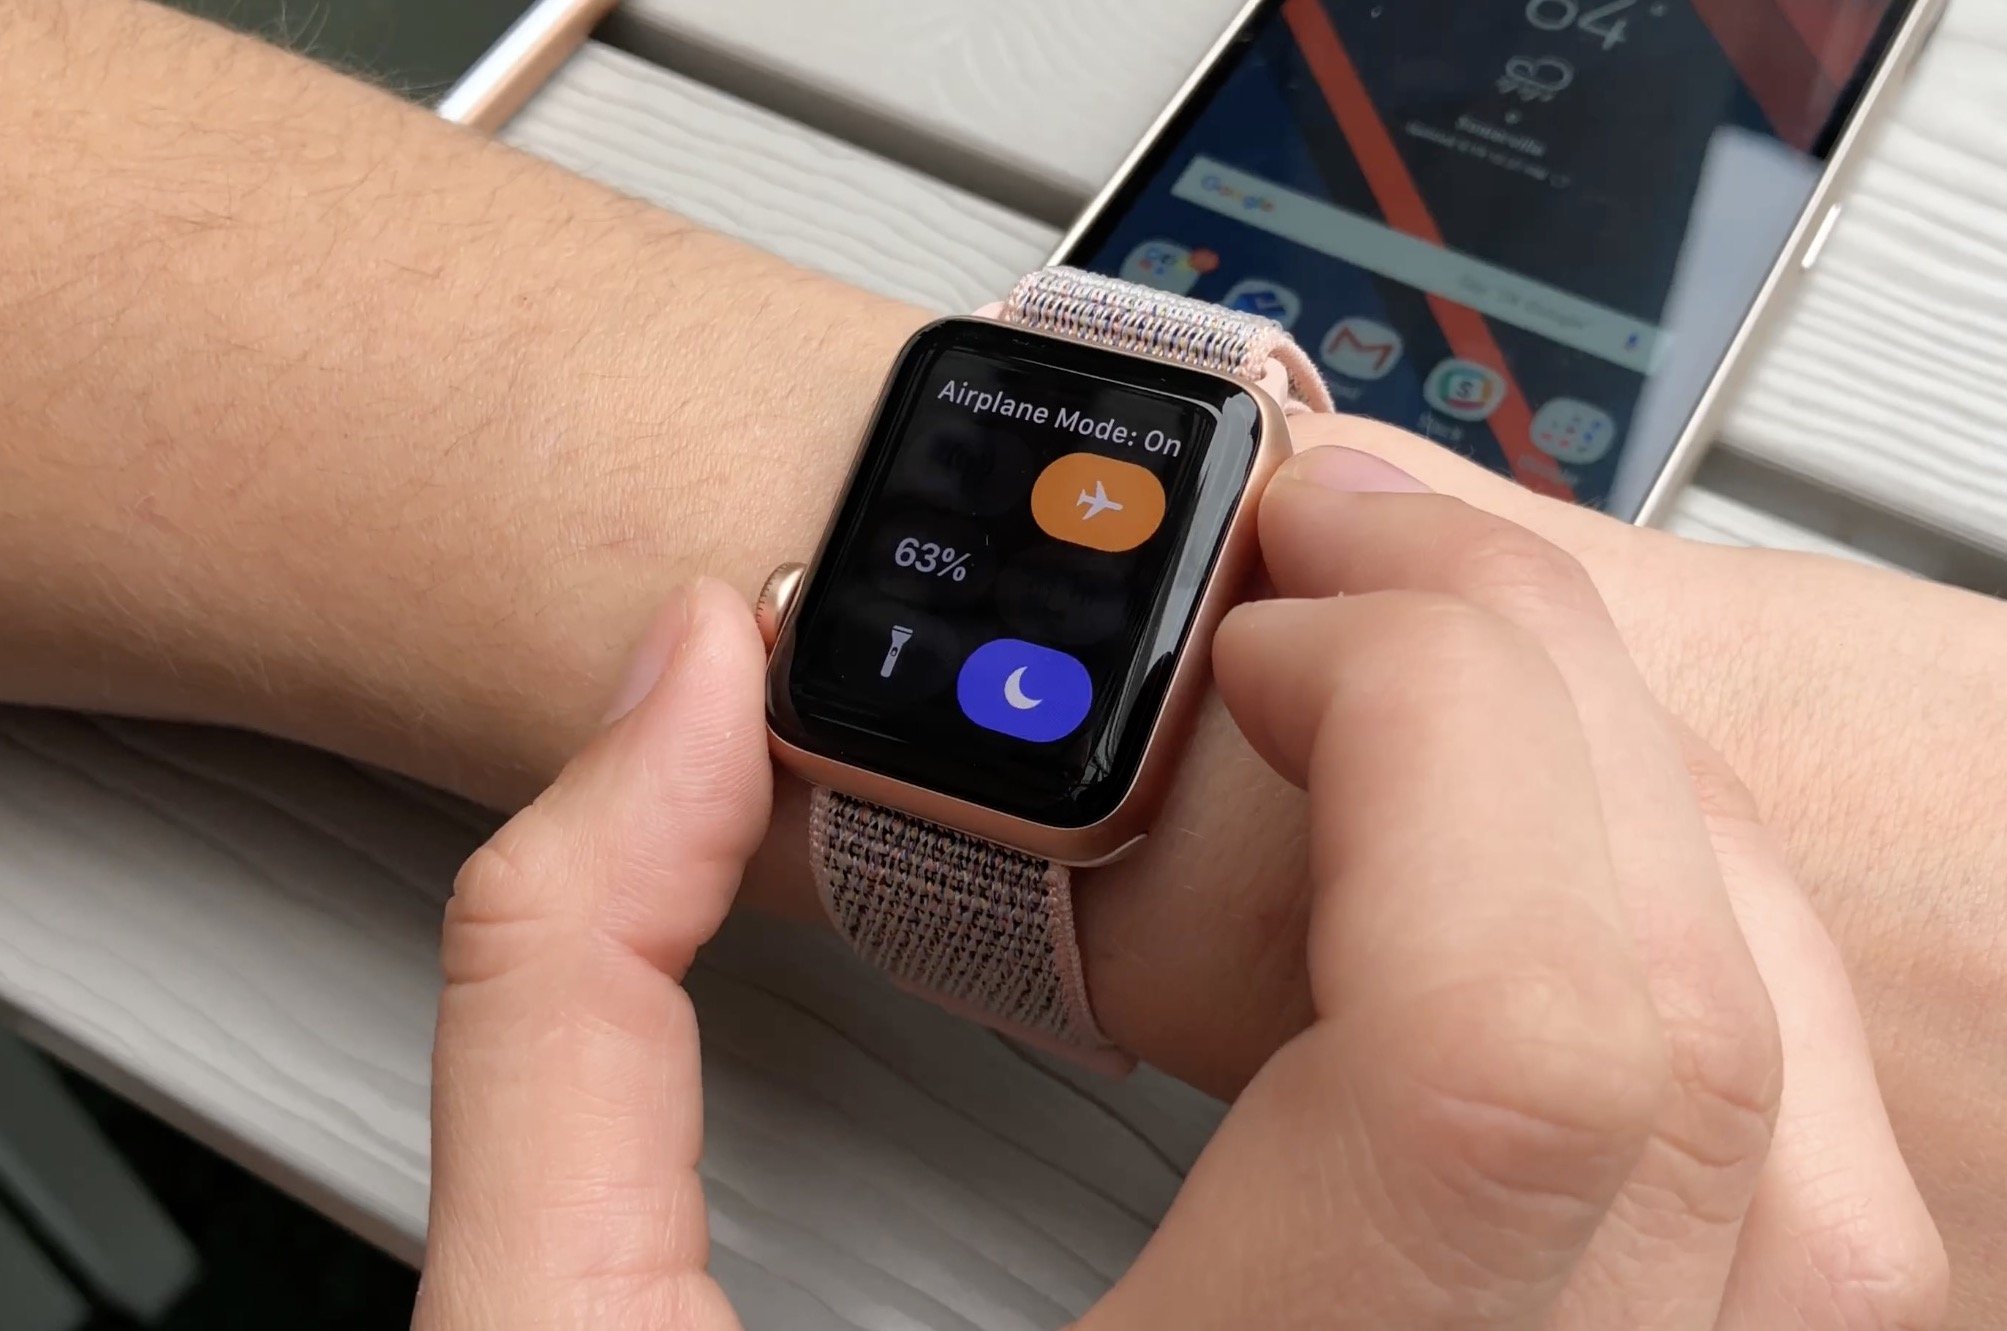  A person is using an Android phone to control an Apple Watch.